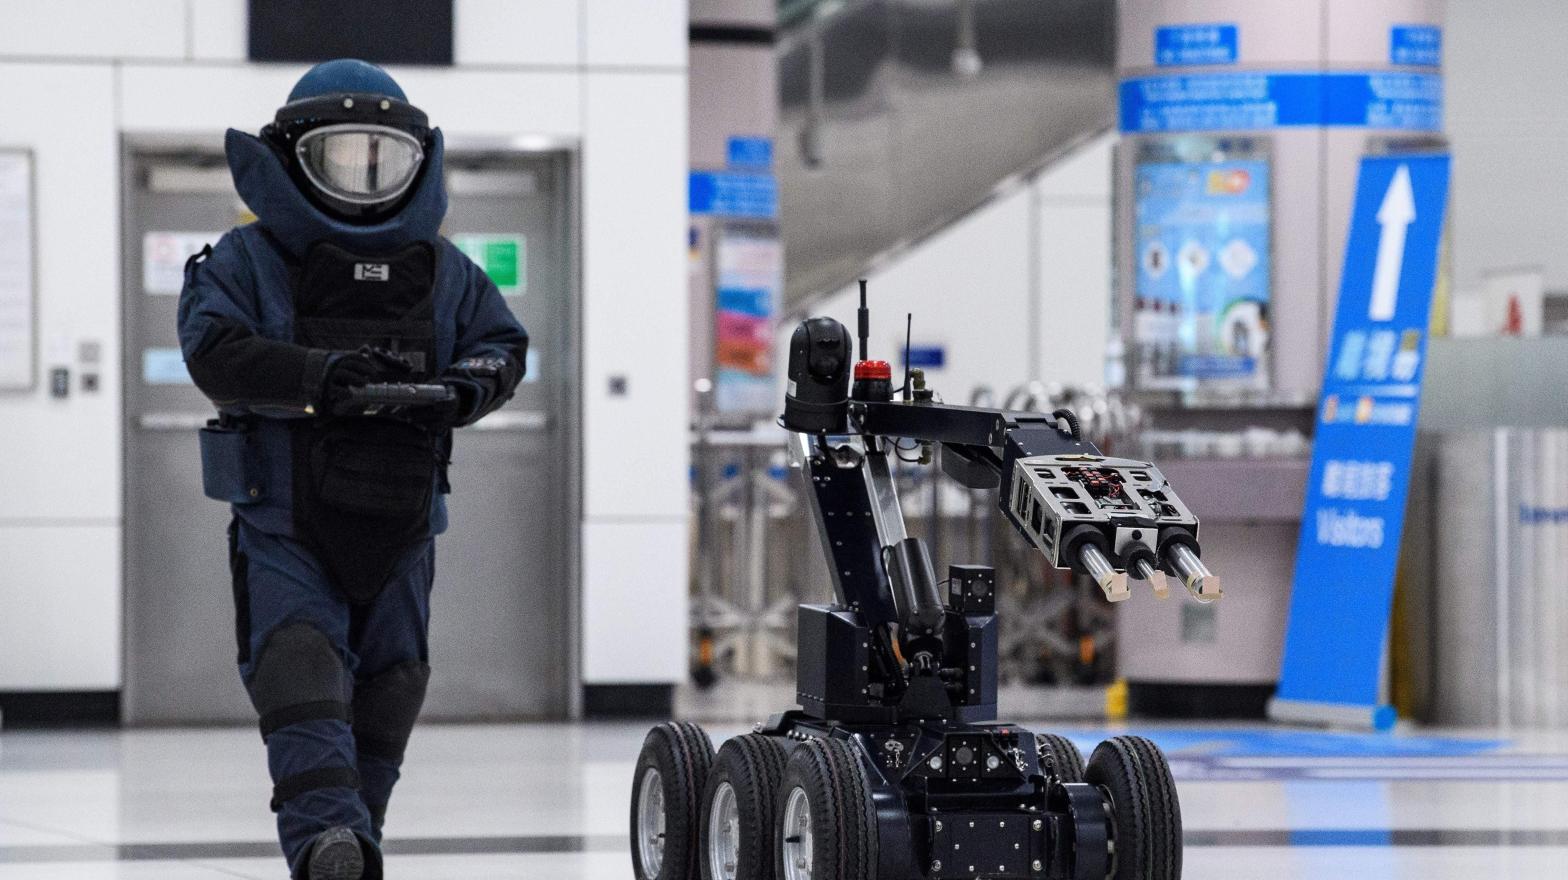 A Hong Kong police officer controls a bomb disposal robot in a counter-terrorism exercise in 2020. (Photo: Anthony Wallace / AFP, Getty Images)